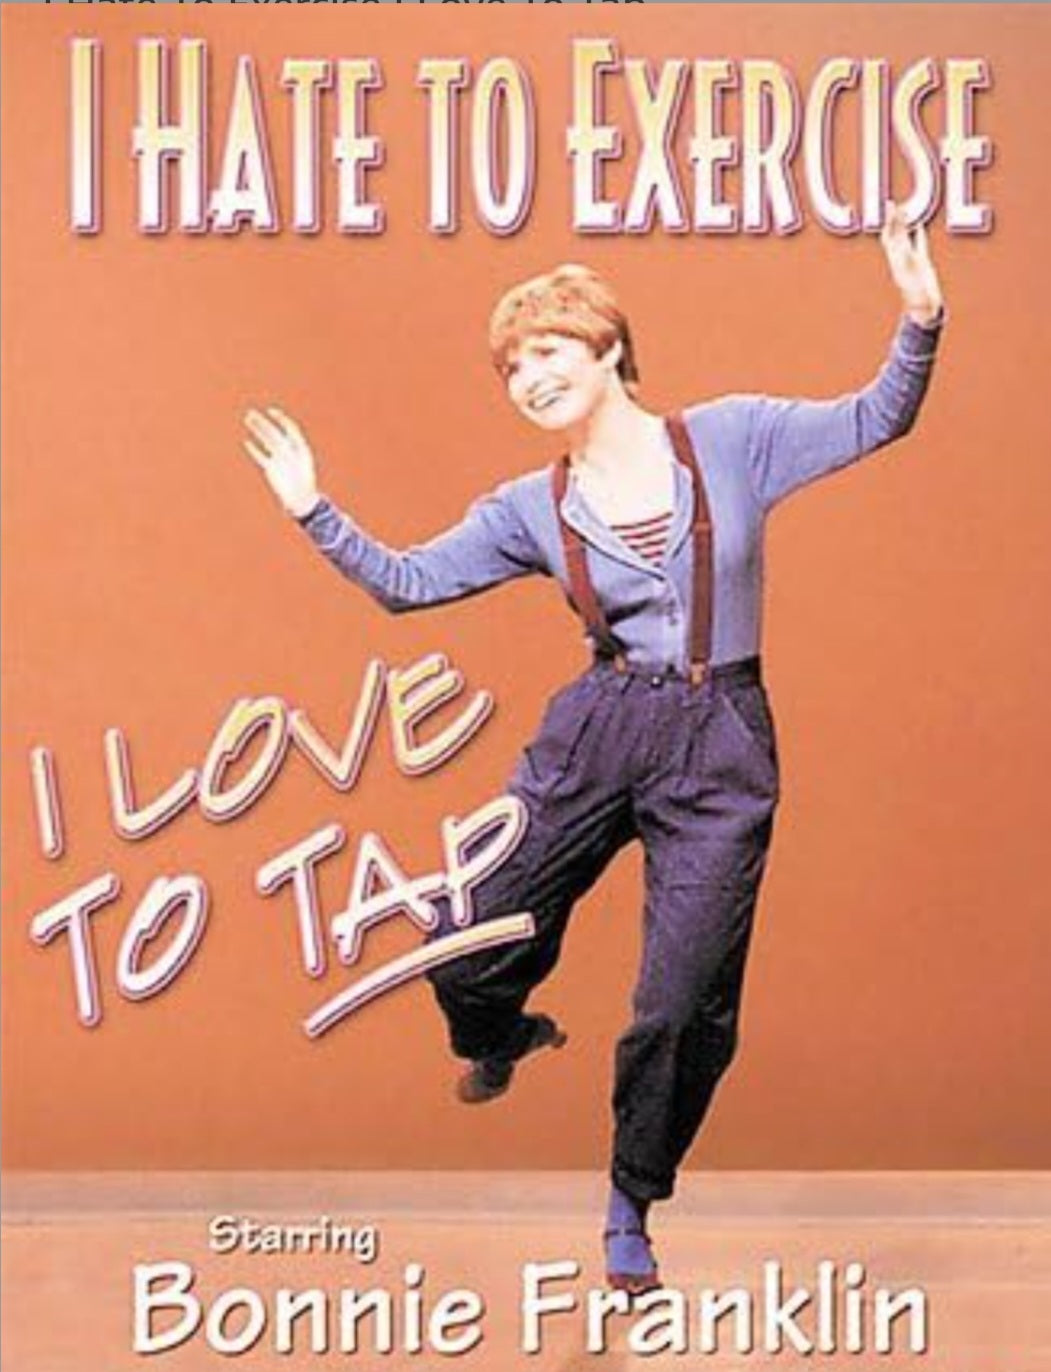 BONNIE FRANKLIN: I HATE TO EXERCISE, I LOVE TO TAP (1984) Bonnie Fraklin